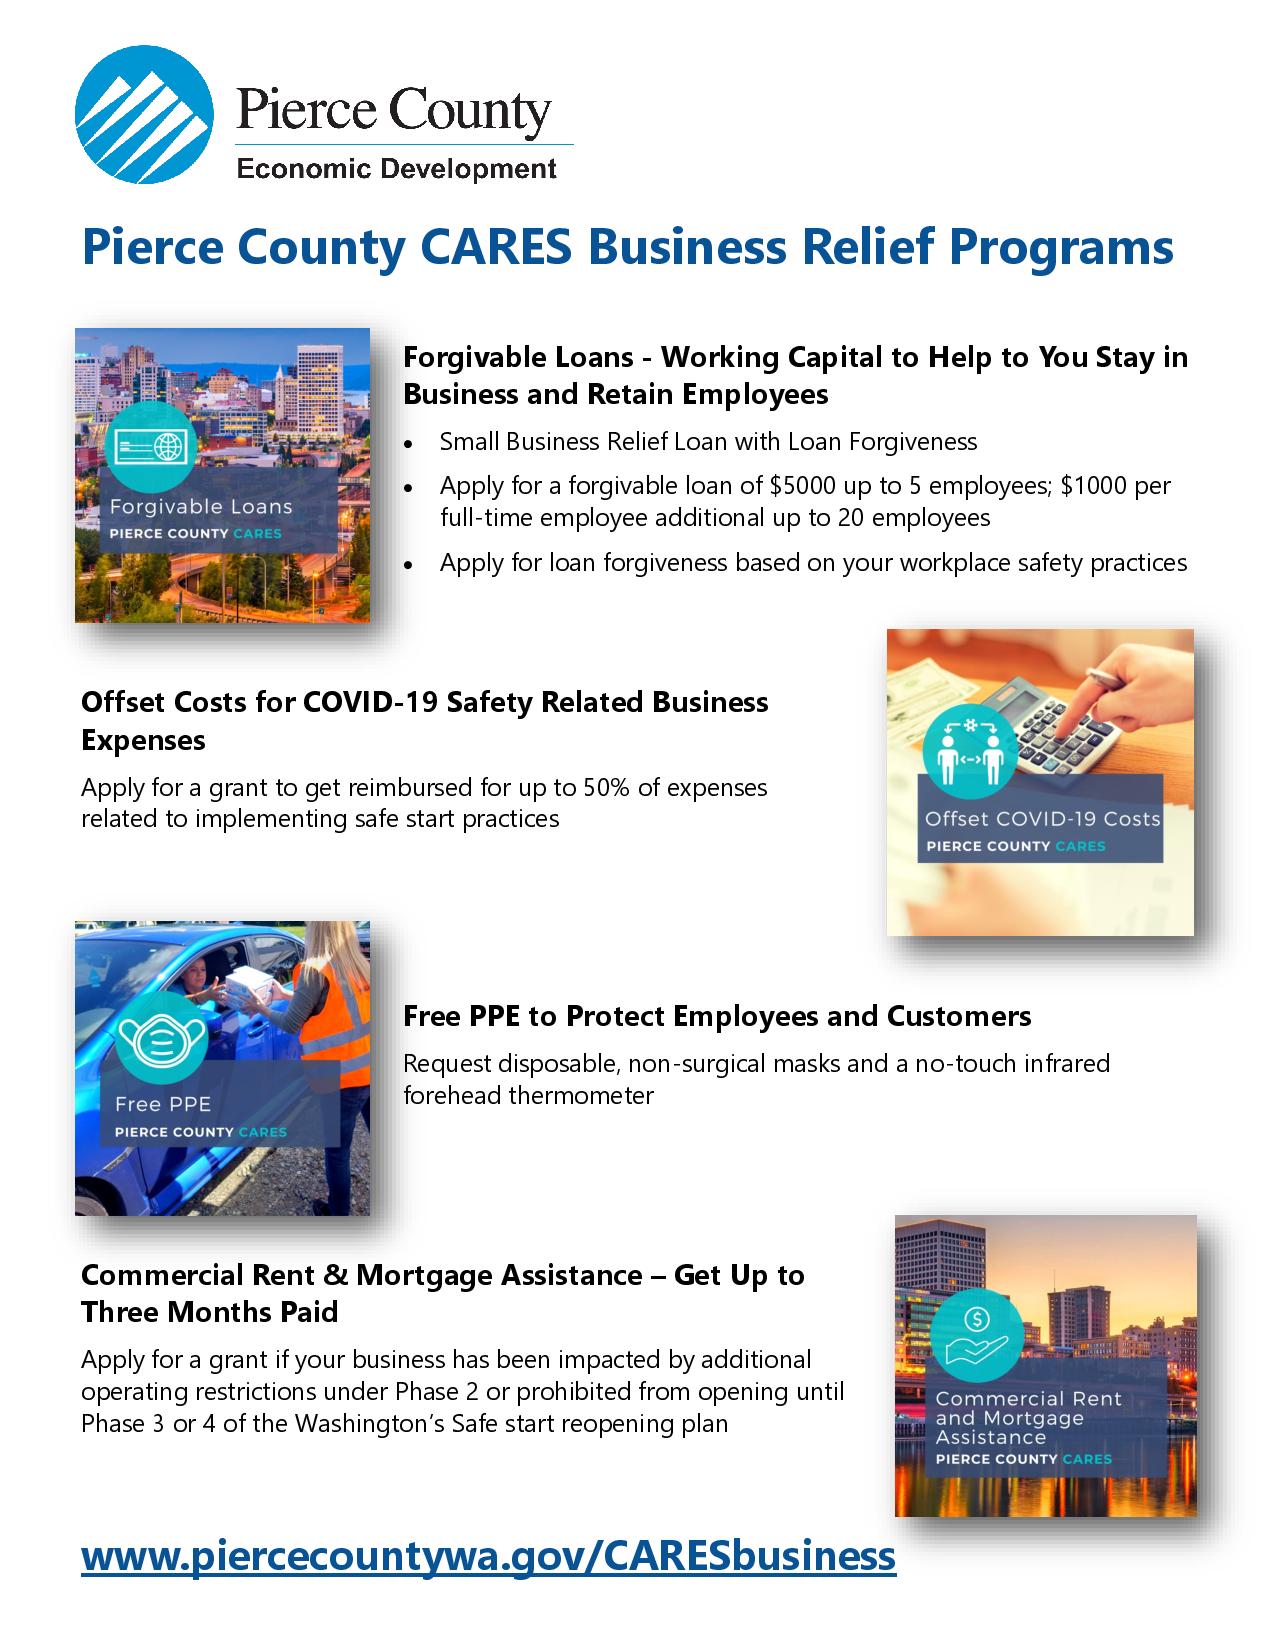 Pierce County CARES Business Relief Programs 2